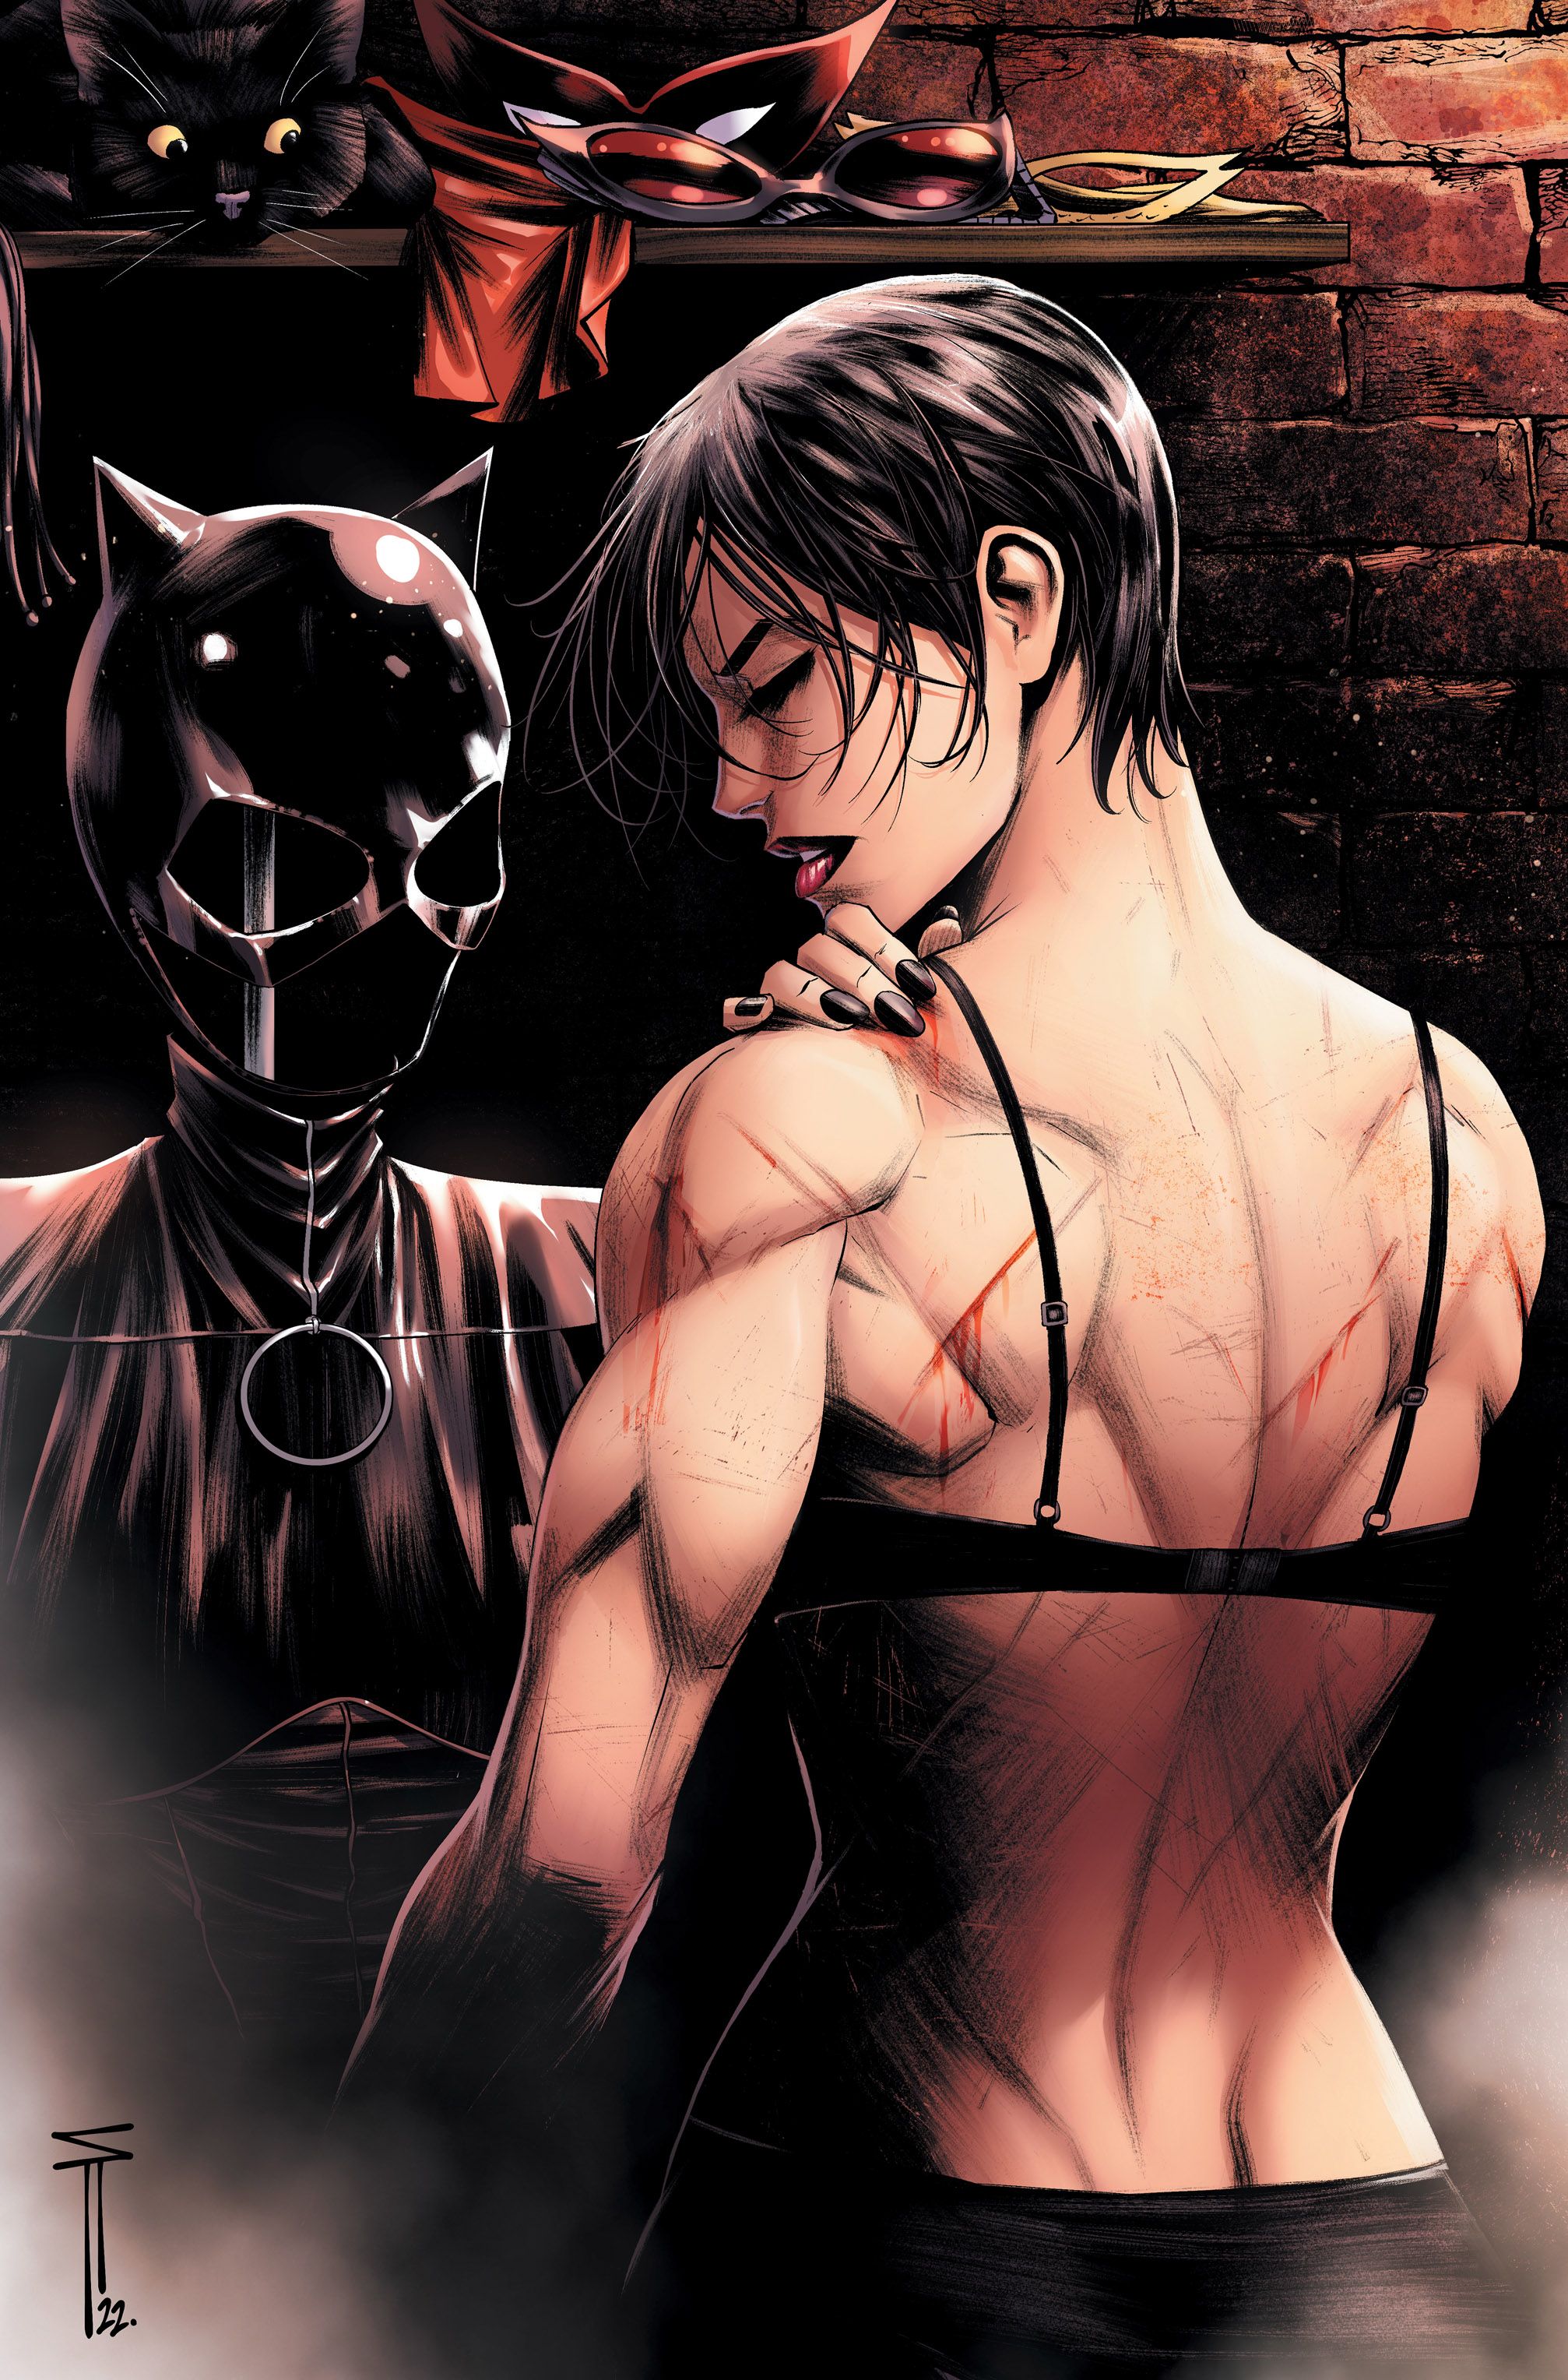 Catwoman 53 Open to Order Variant (Acuna)